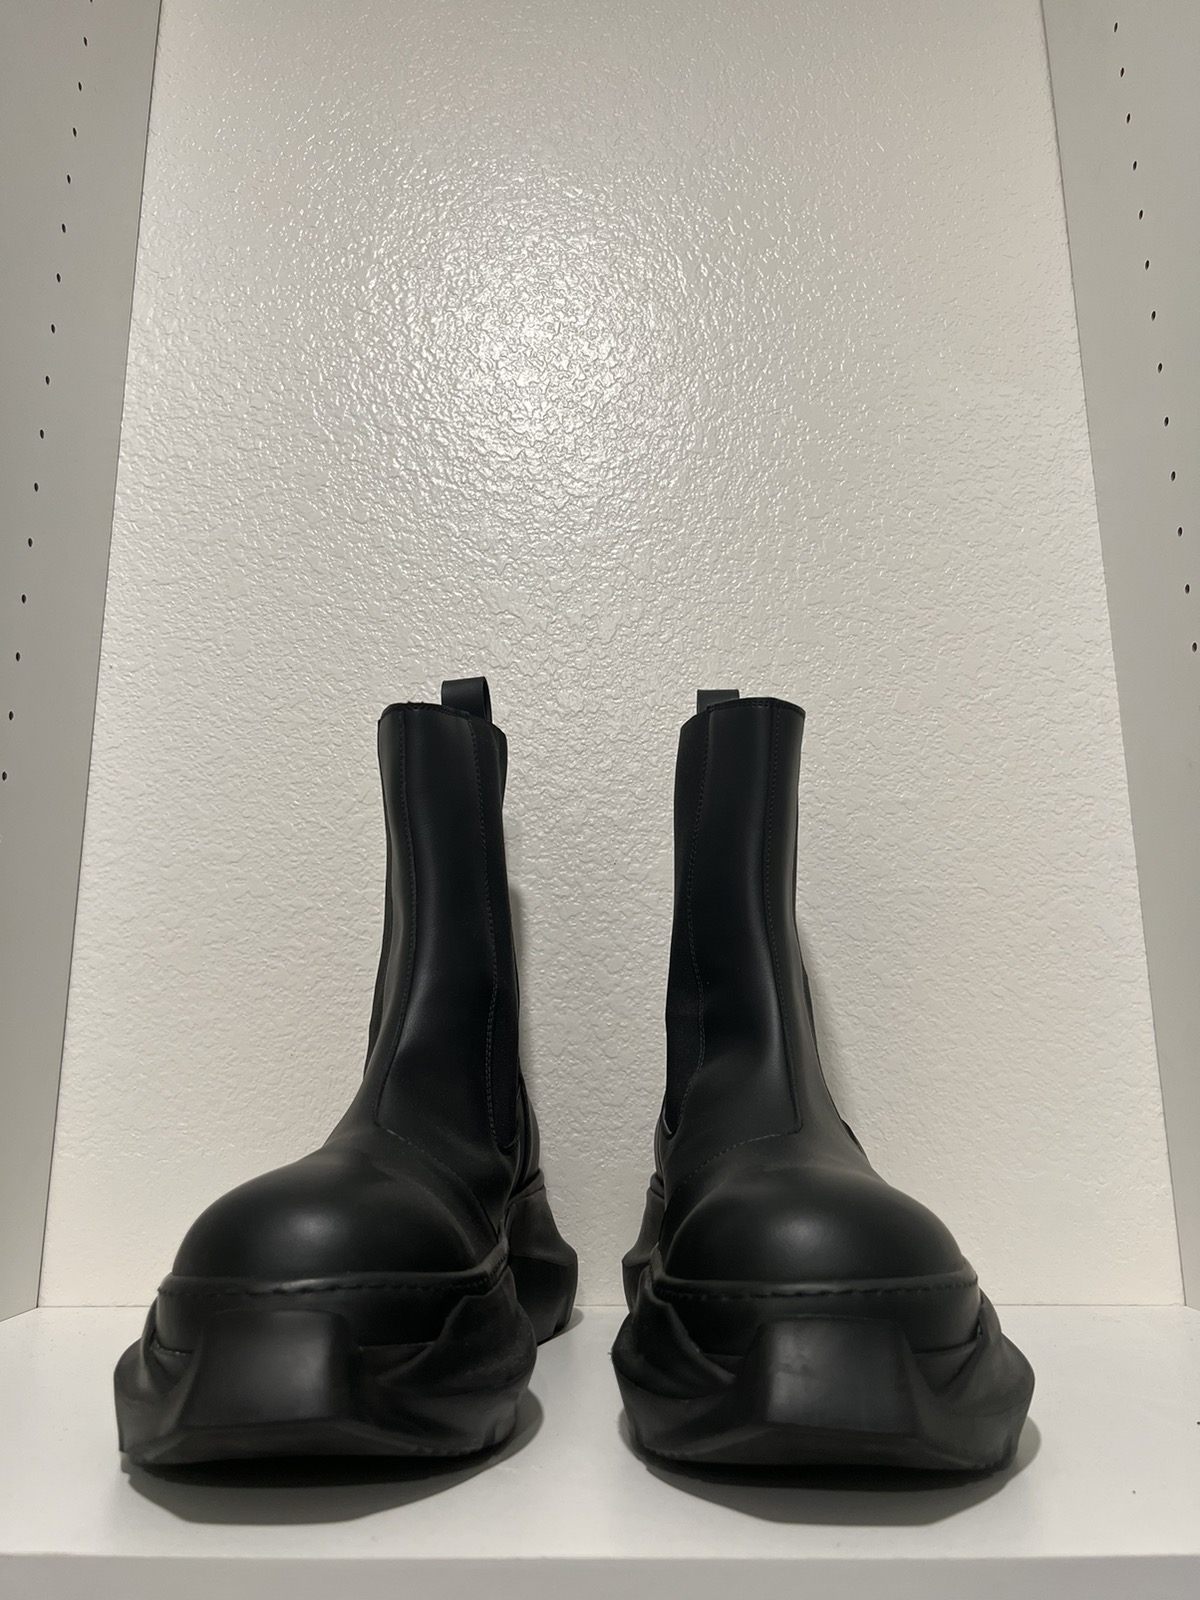 RICK OWENS DRKSHDW BEETLE ABSTRACT BOOT - 2